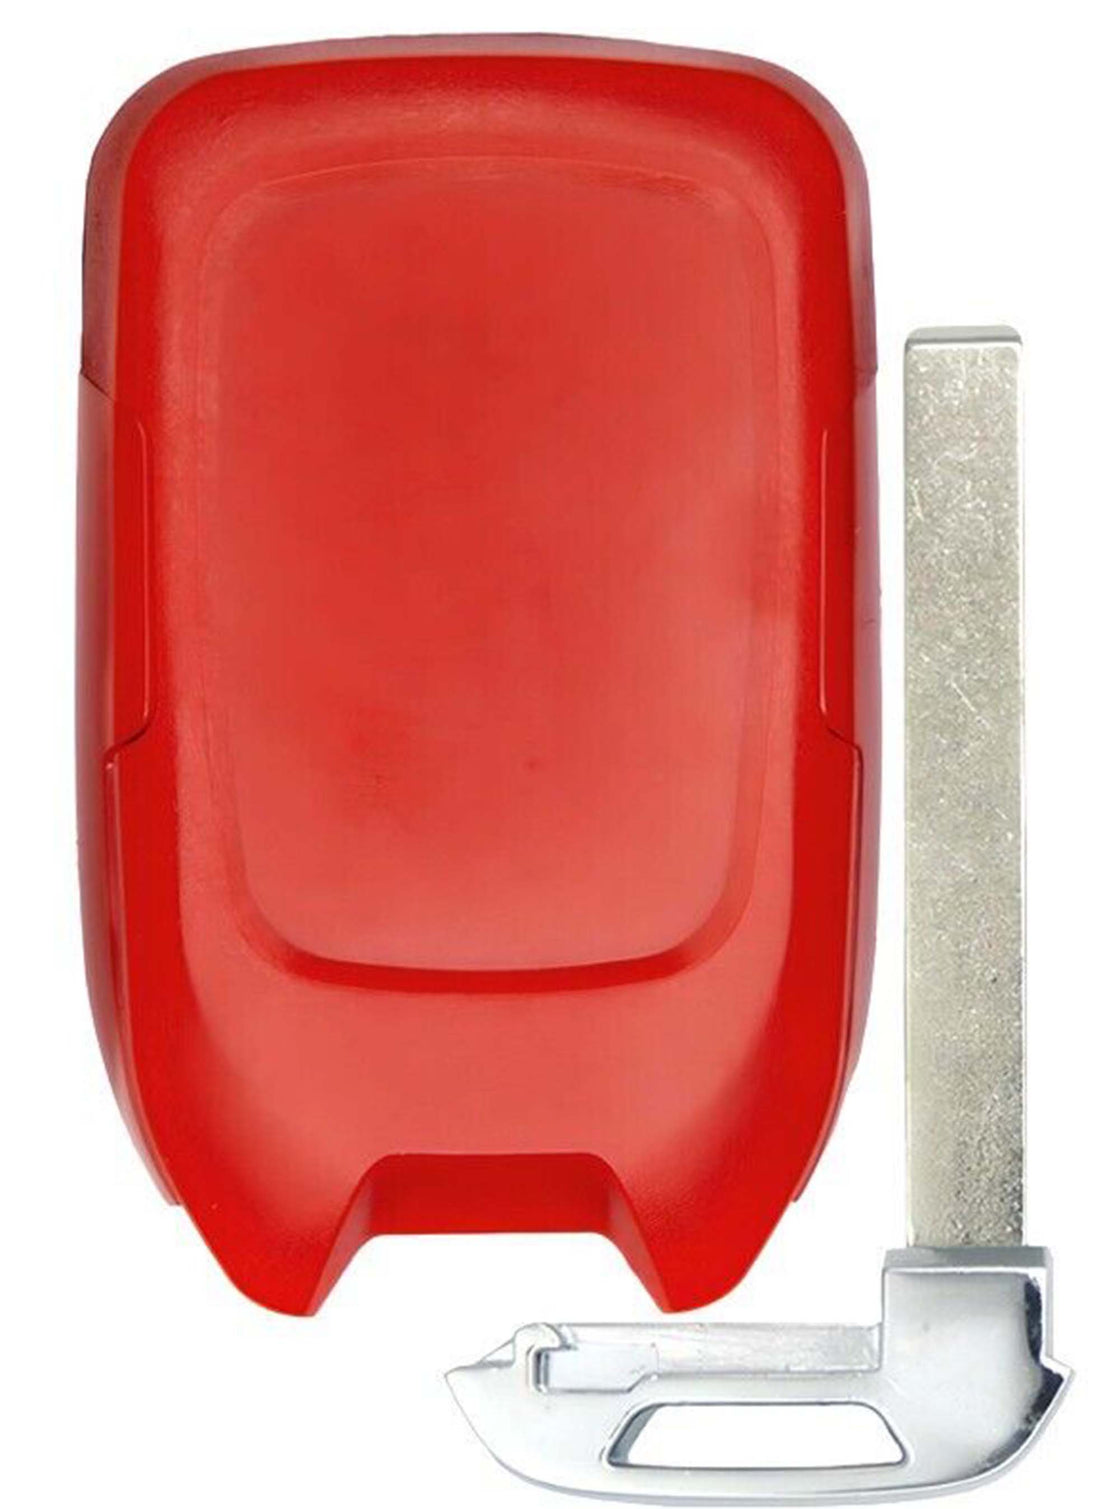 1x New Replacement Proximity Key Fob Compatible with & fit for Select GMC Vehicles. HYQ1EA 433 MHz - HYQ1EA-P-RED-06